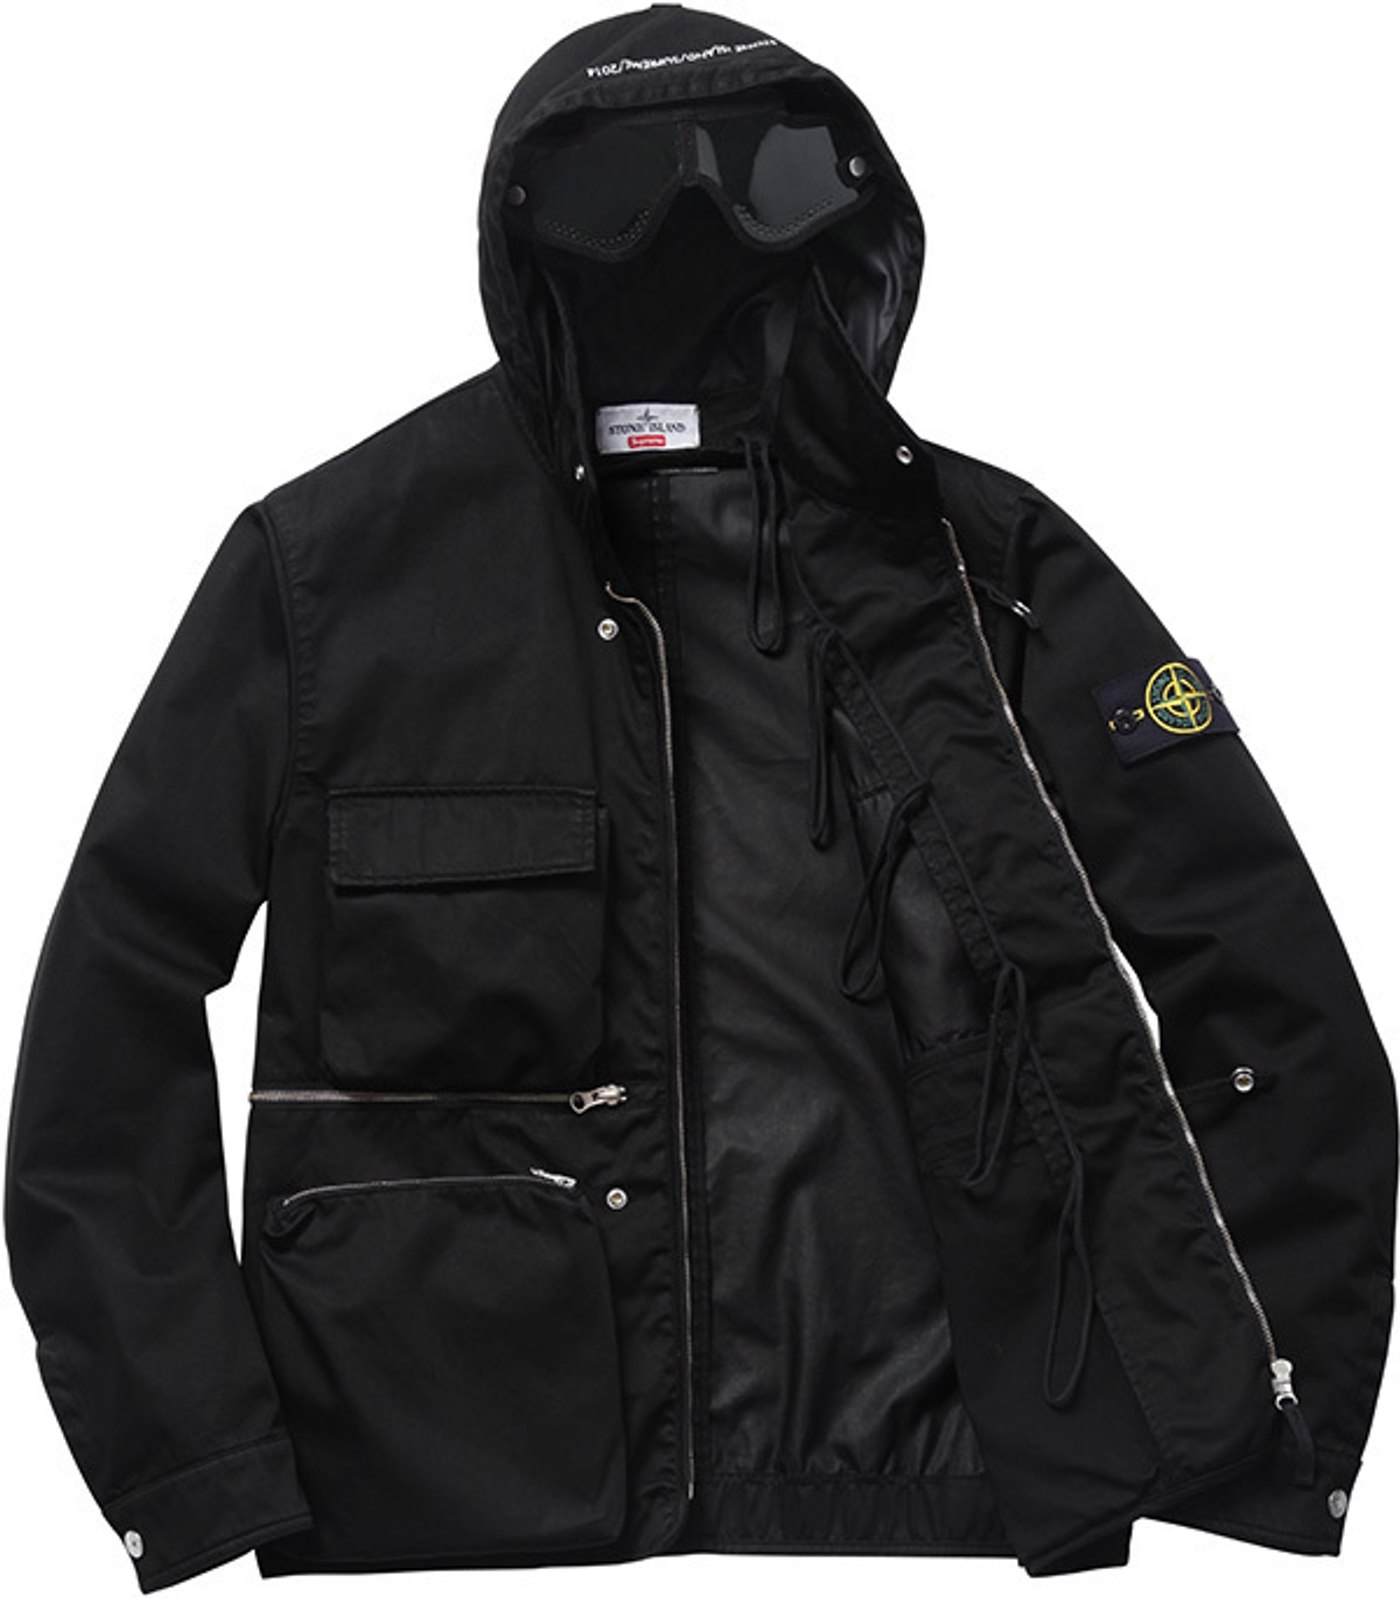 Raso Gommato Cover Nero Jacket 
Wind and water-resistant cotton with removable down liner. Removable eye mask with stow away hood.<br>
Made by Stone Island<br> (21/36)